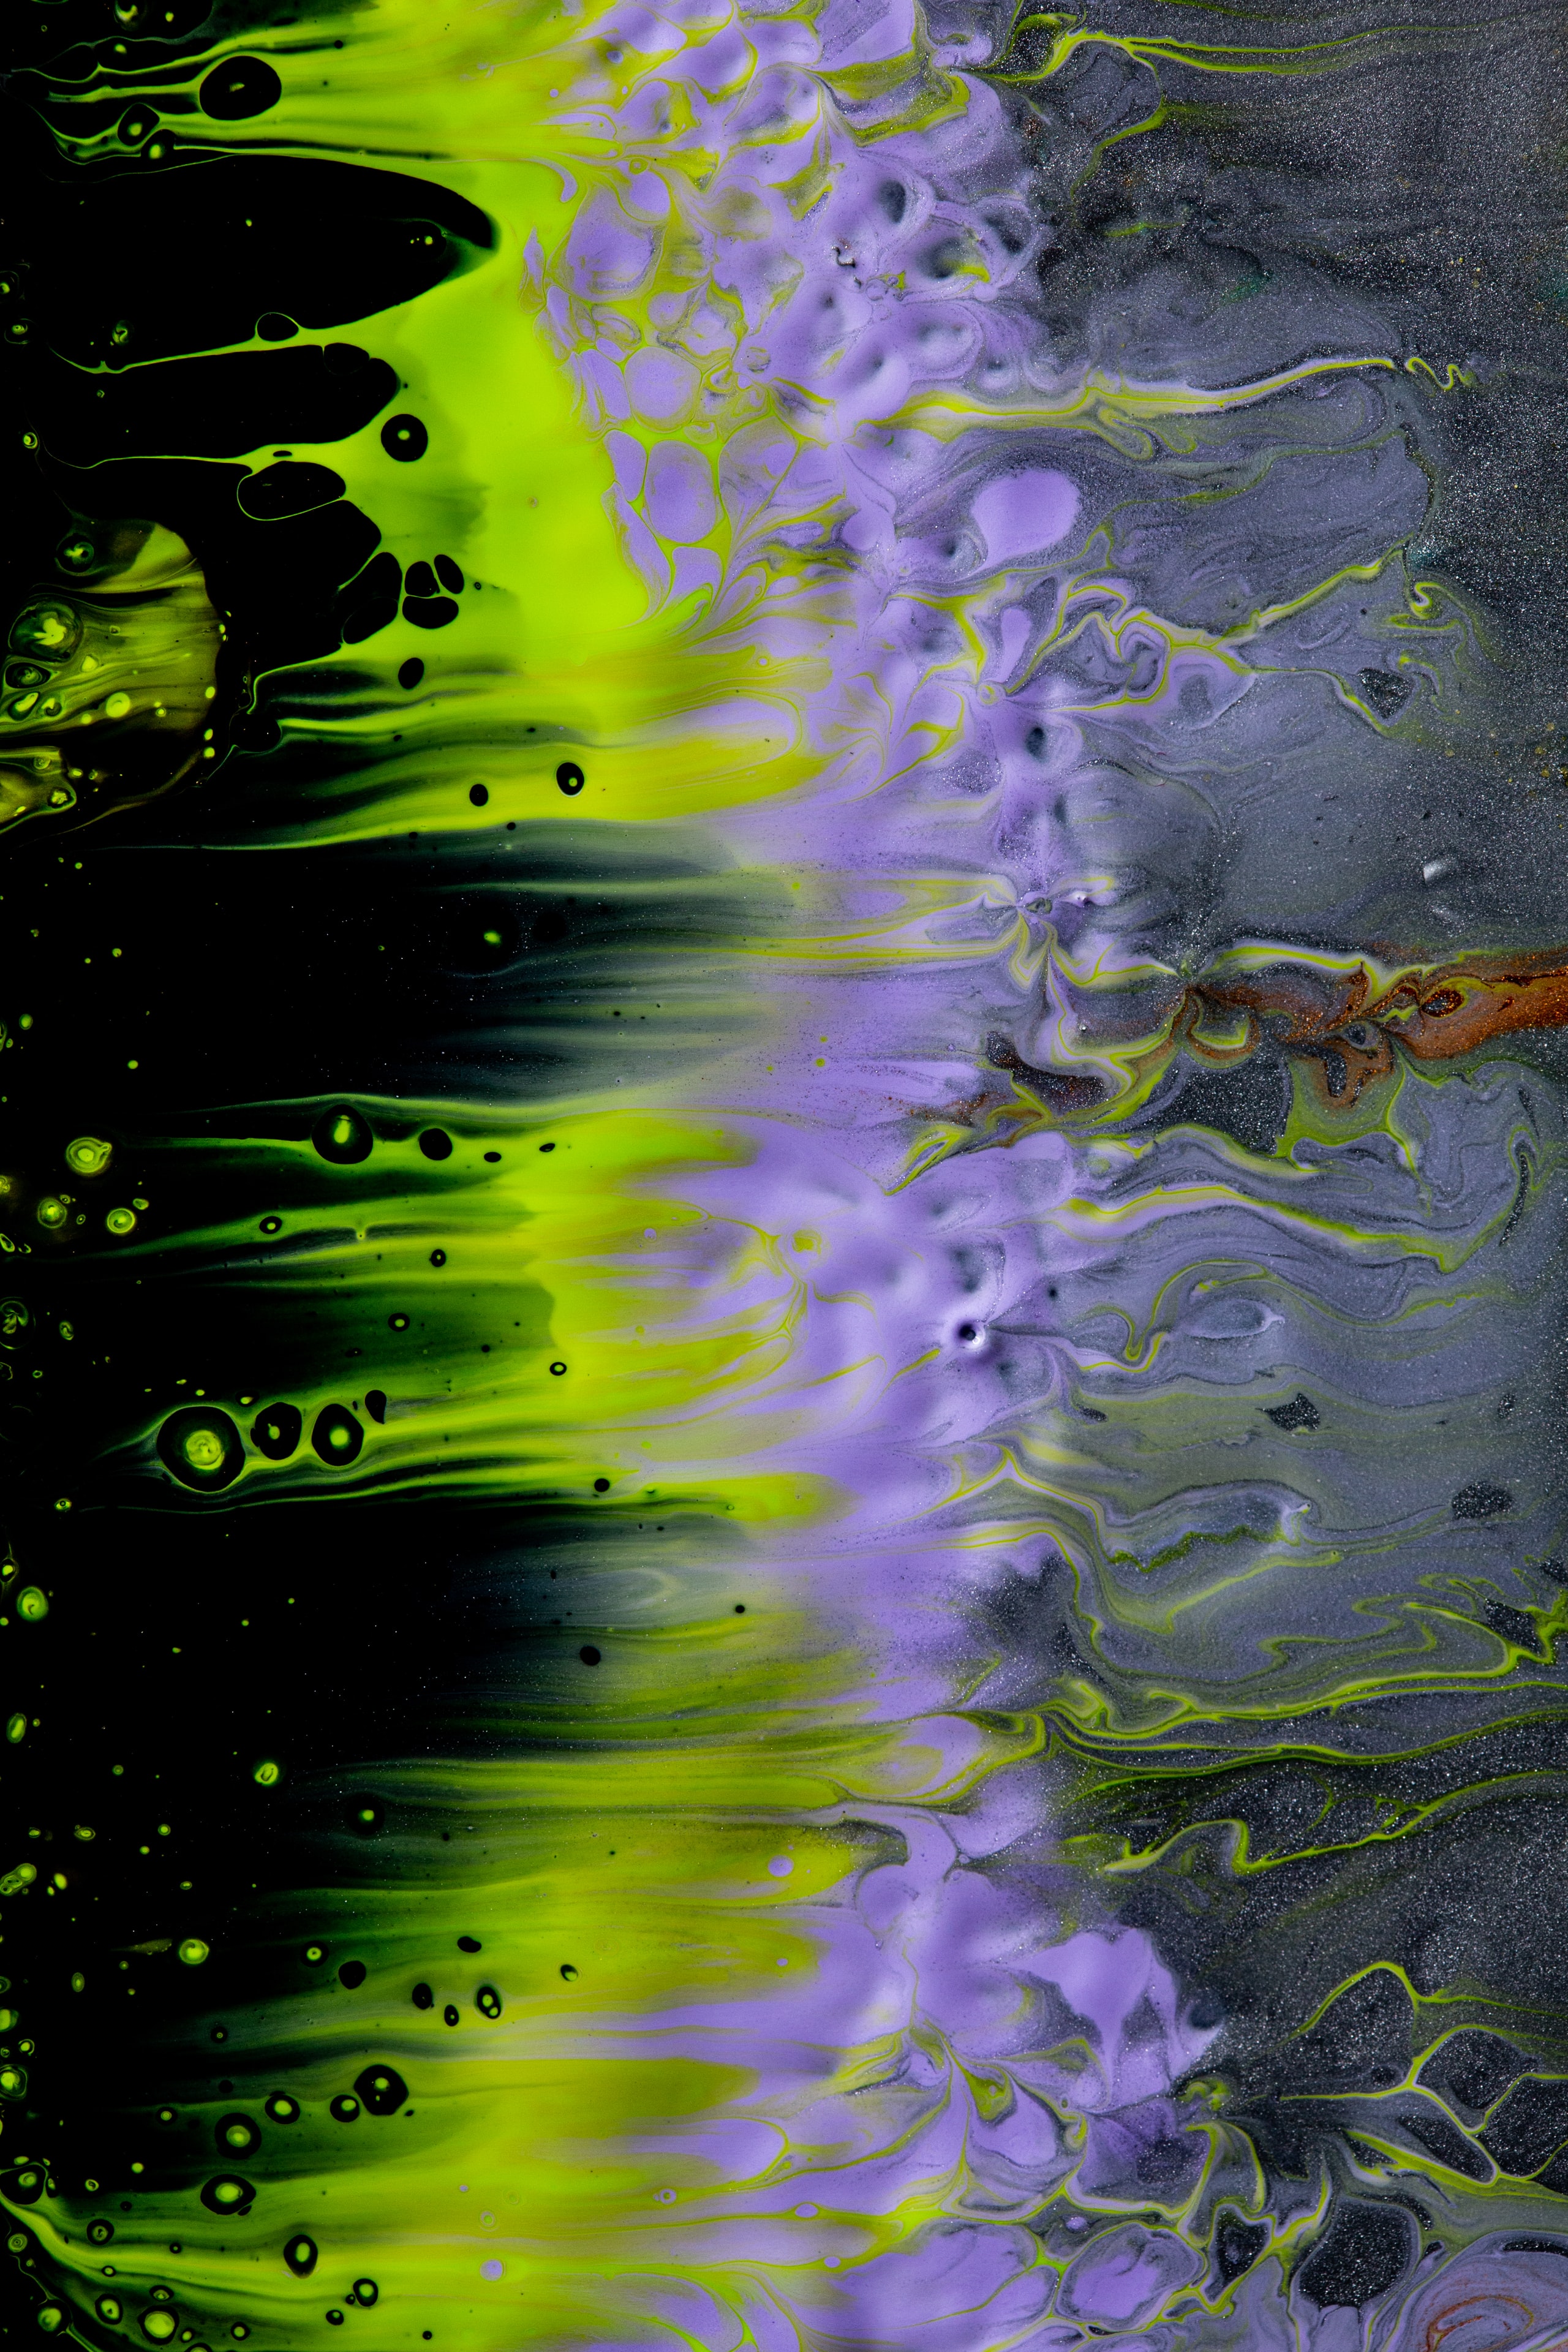 paint, abstract, divorces, multicolored, motley, stains, spots, fluid art iphone wallpaper